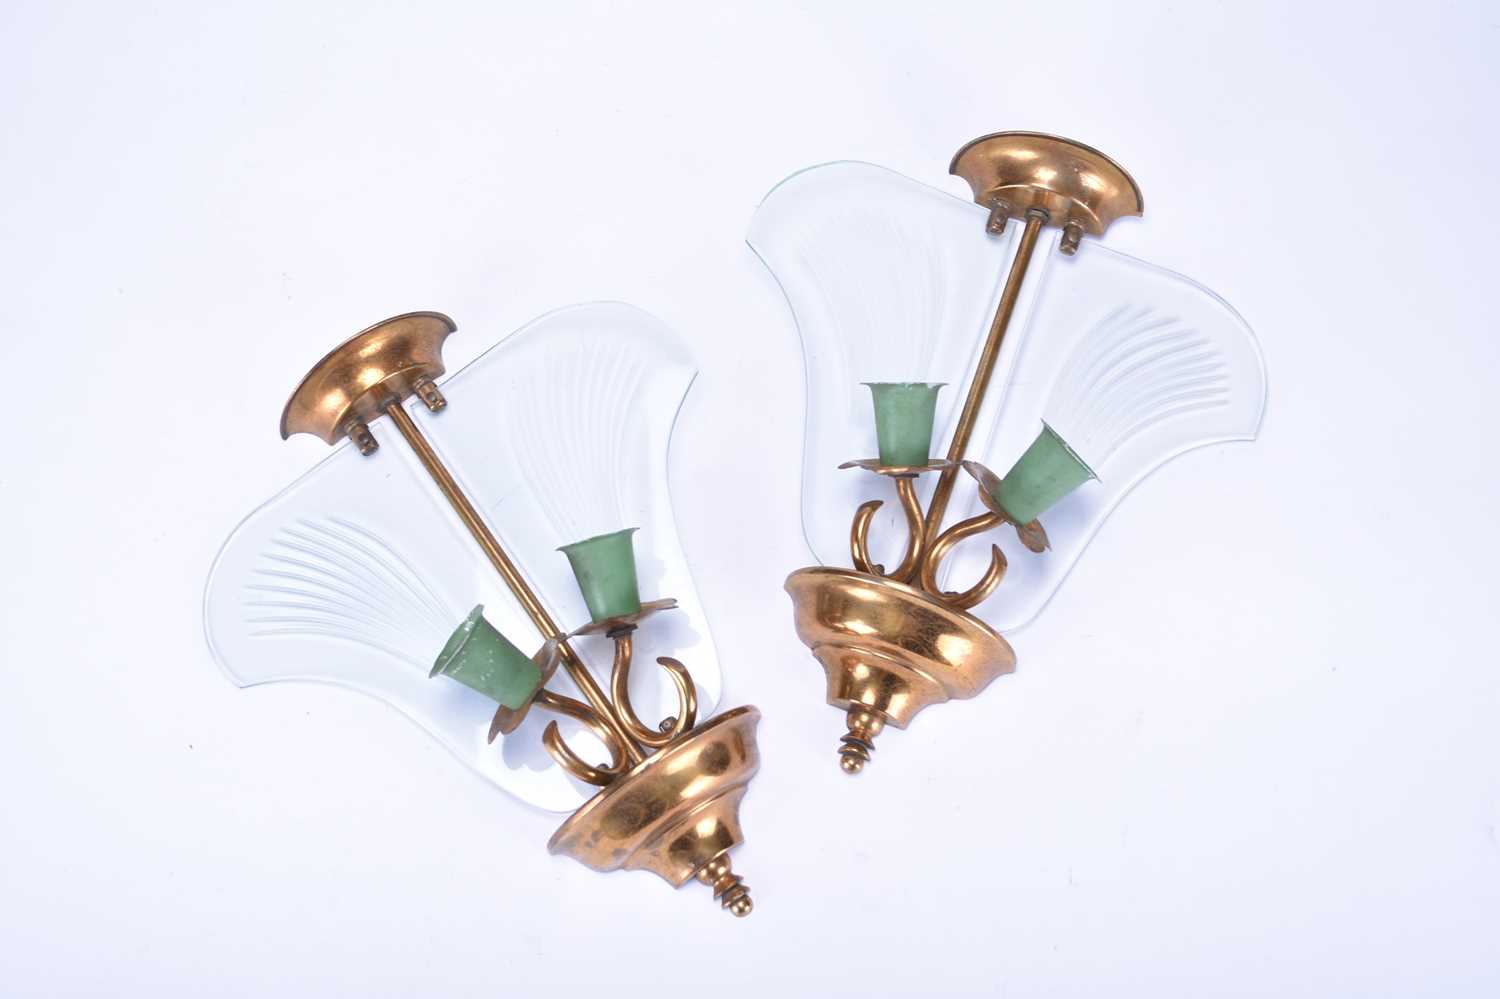 Pietro Chiesa: A pair of gilt brass and glass wall lights